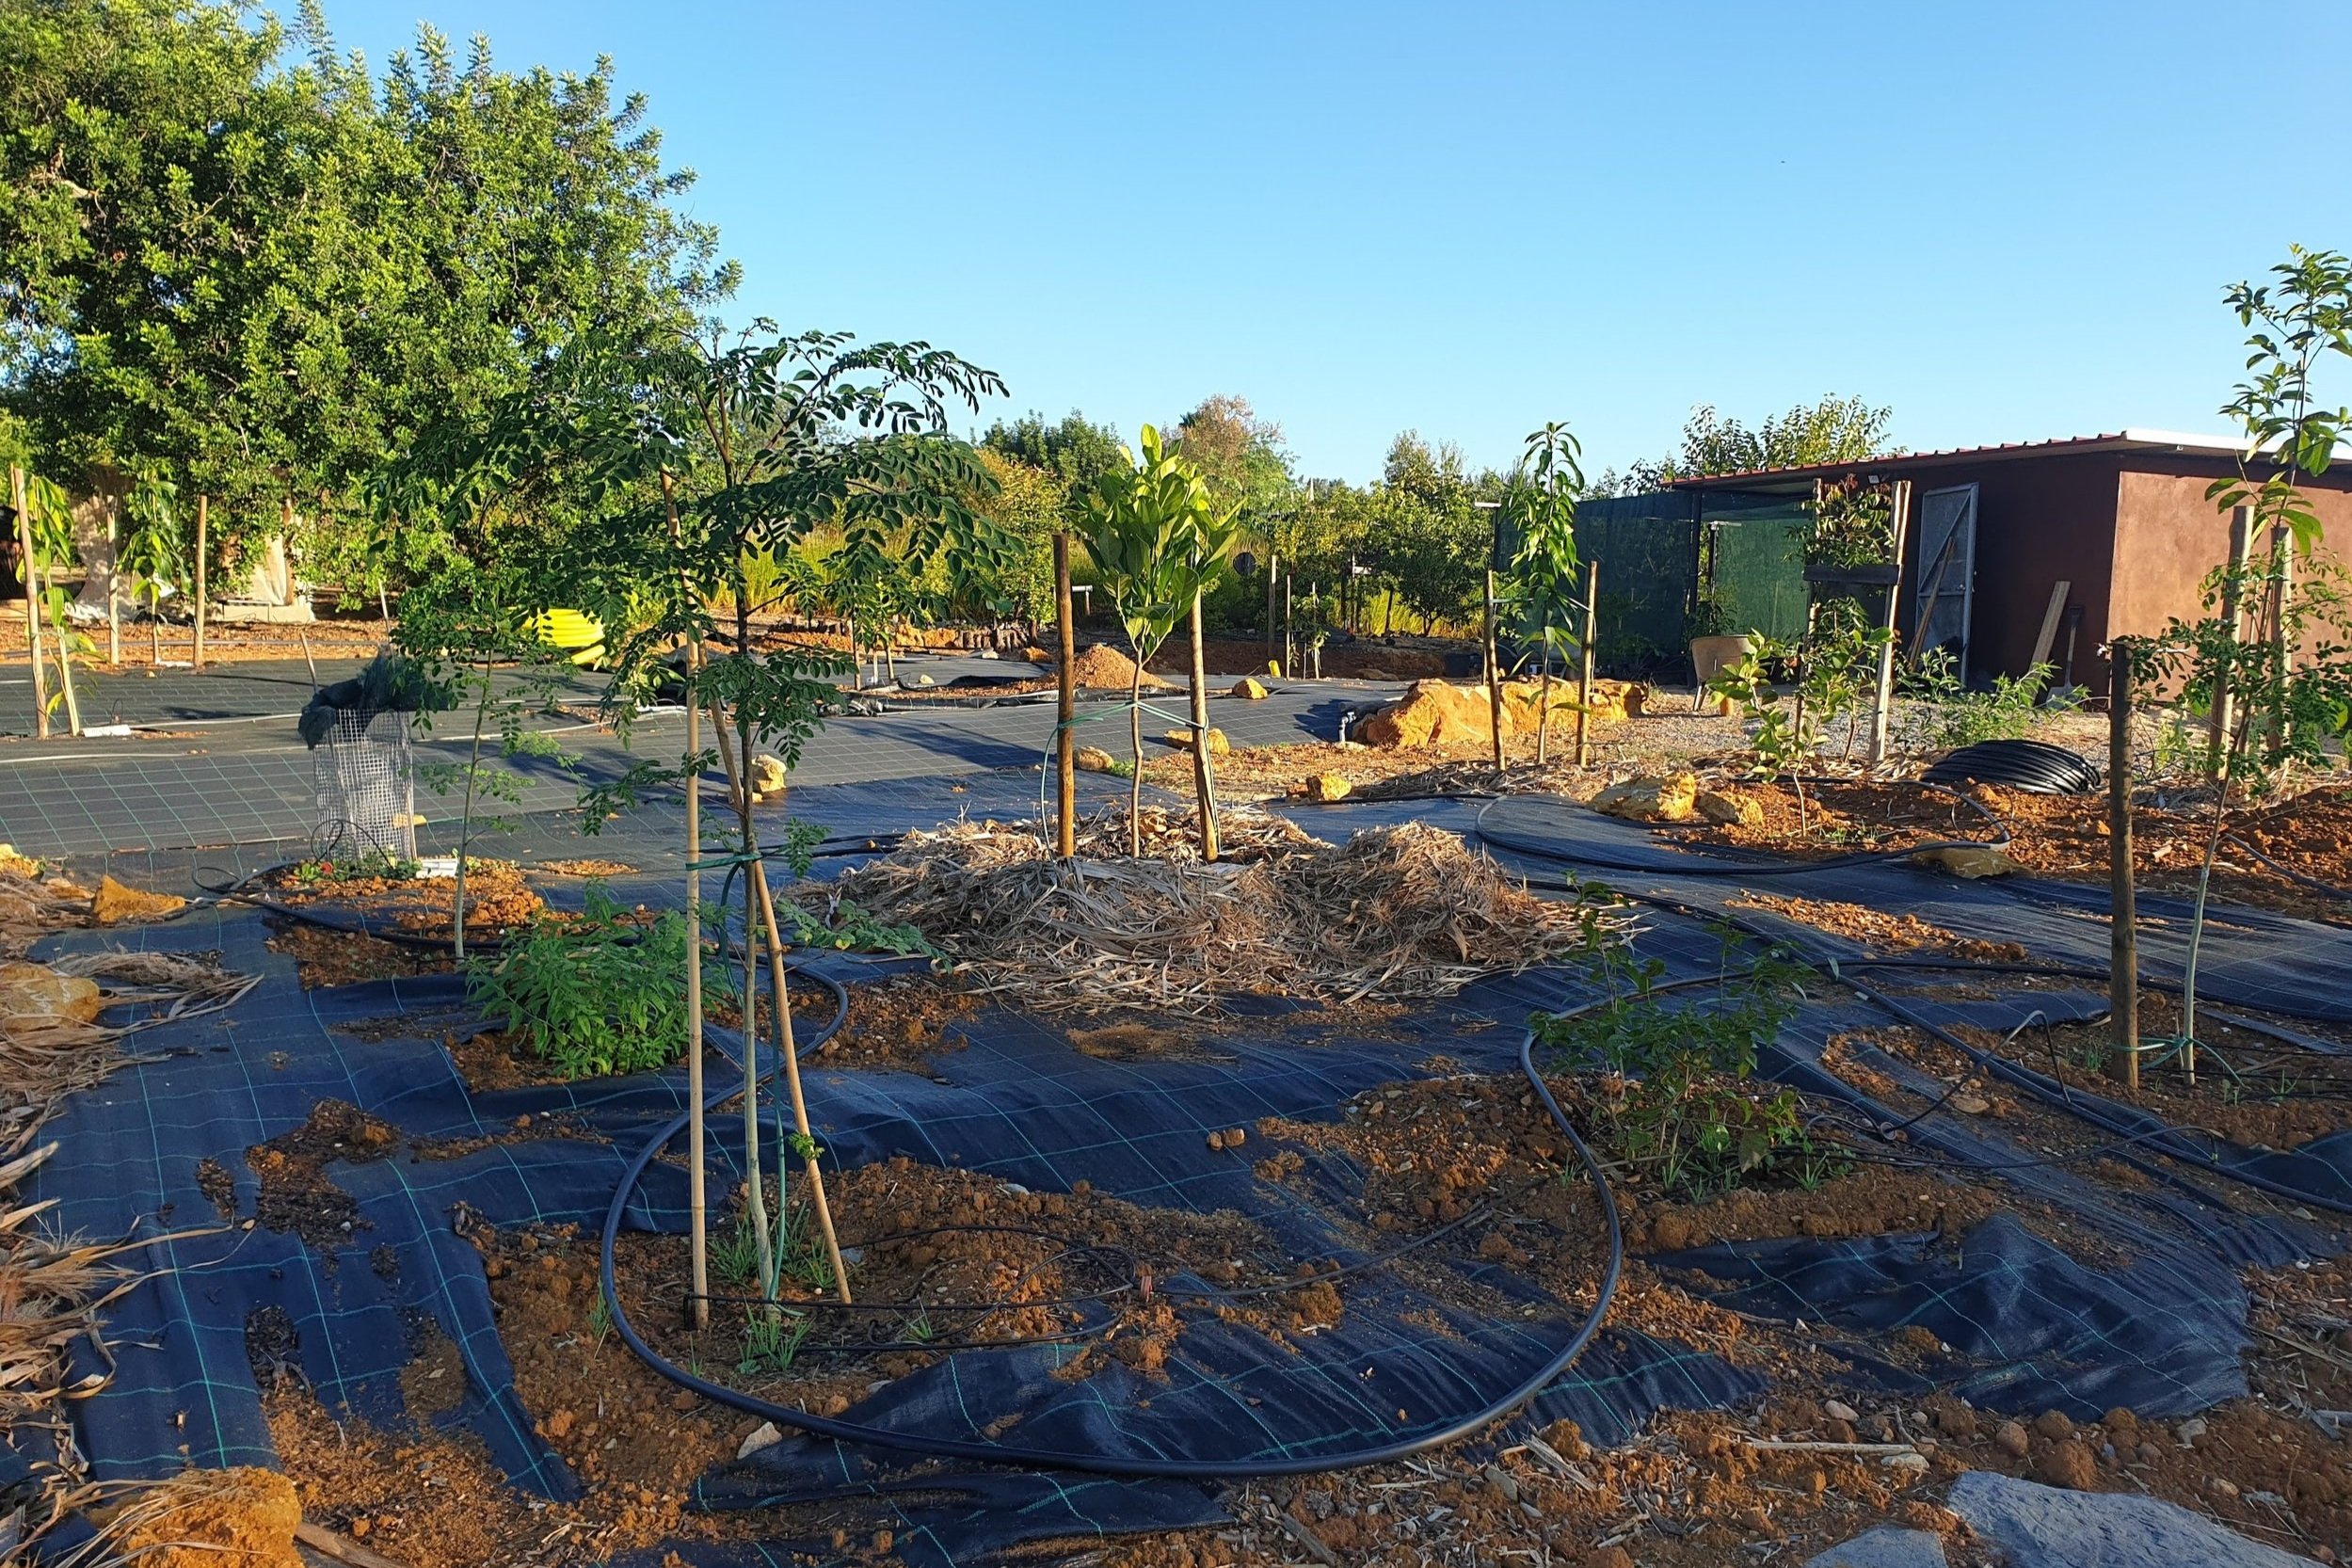 The Orchard side of the Food Forest, 2 months after planting. The lower density in this Experiment is clearly visible